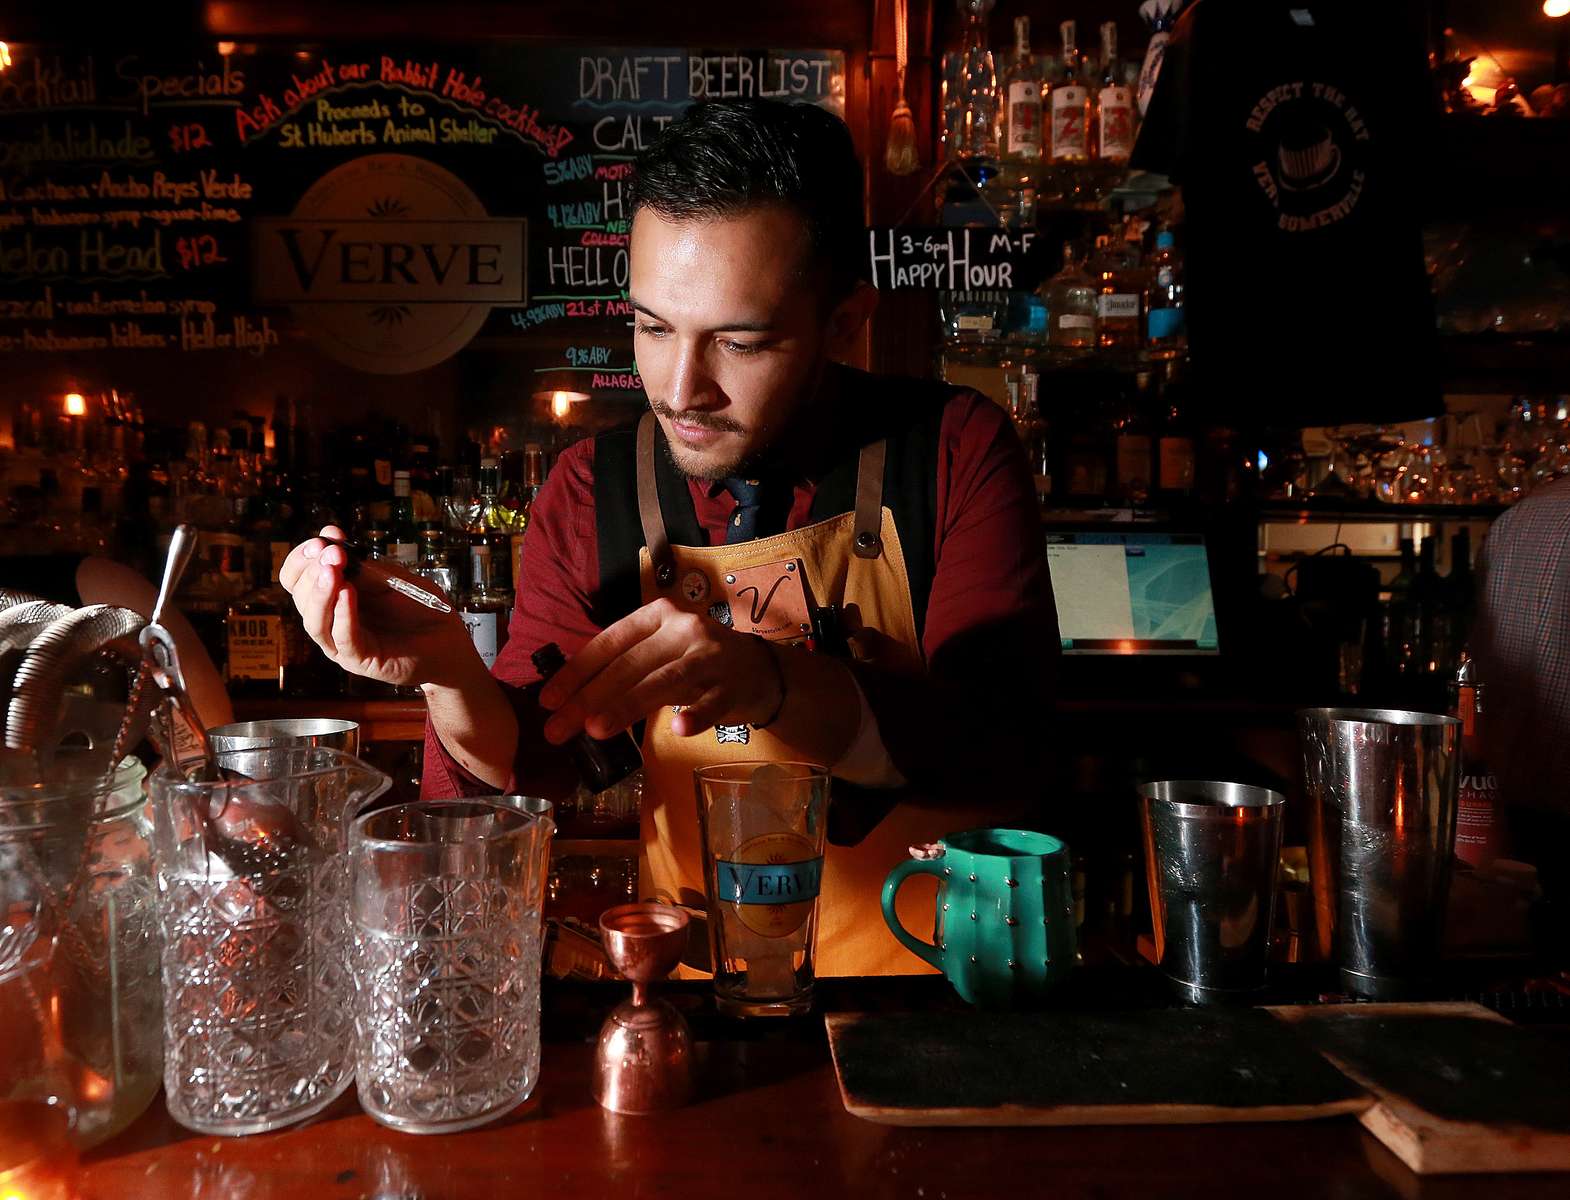 Bartender Roger Aquino makes a cocktail using a dropper to add flavor at Verve restaurant and bar in Somerville.